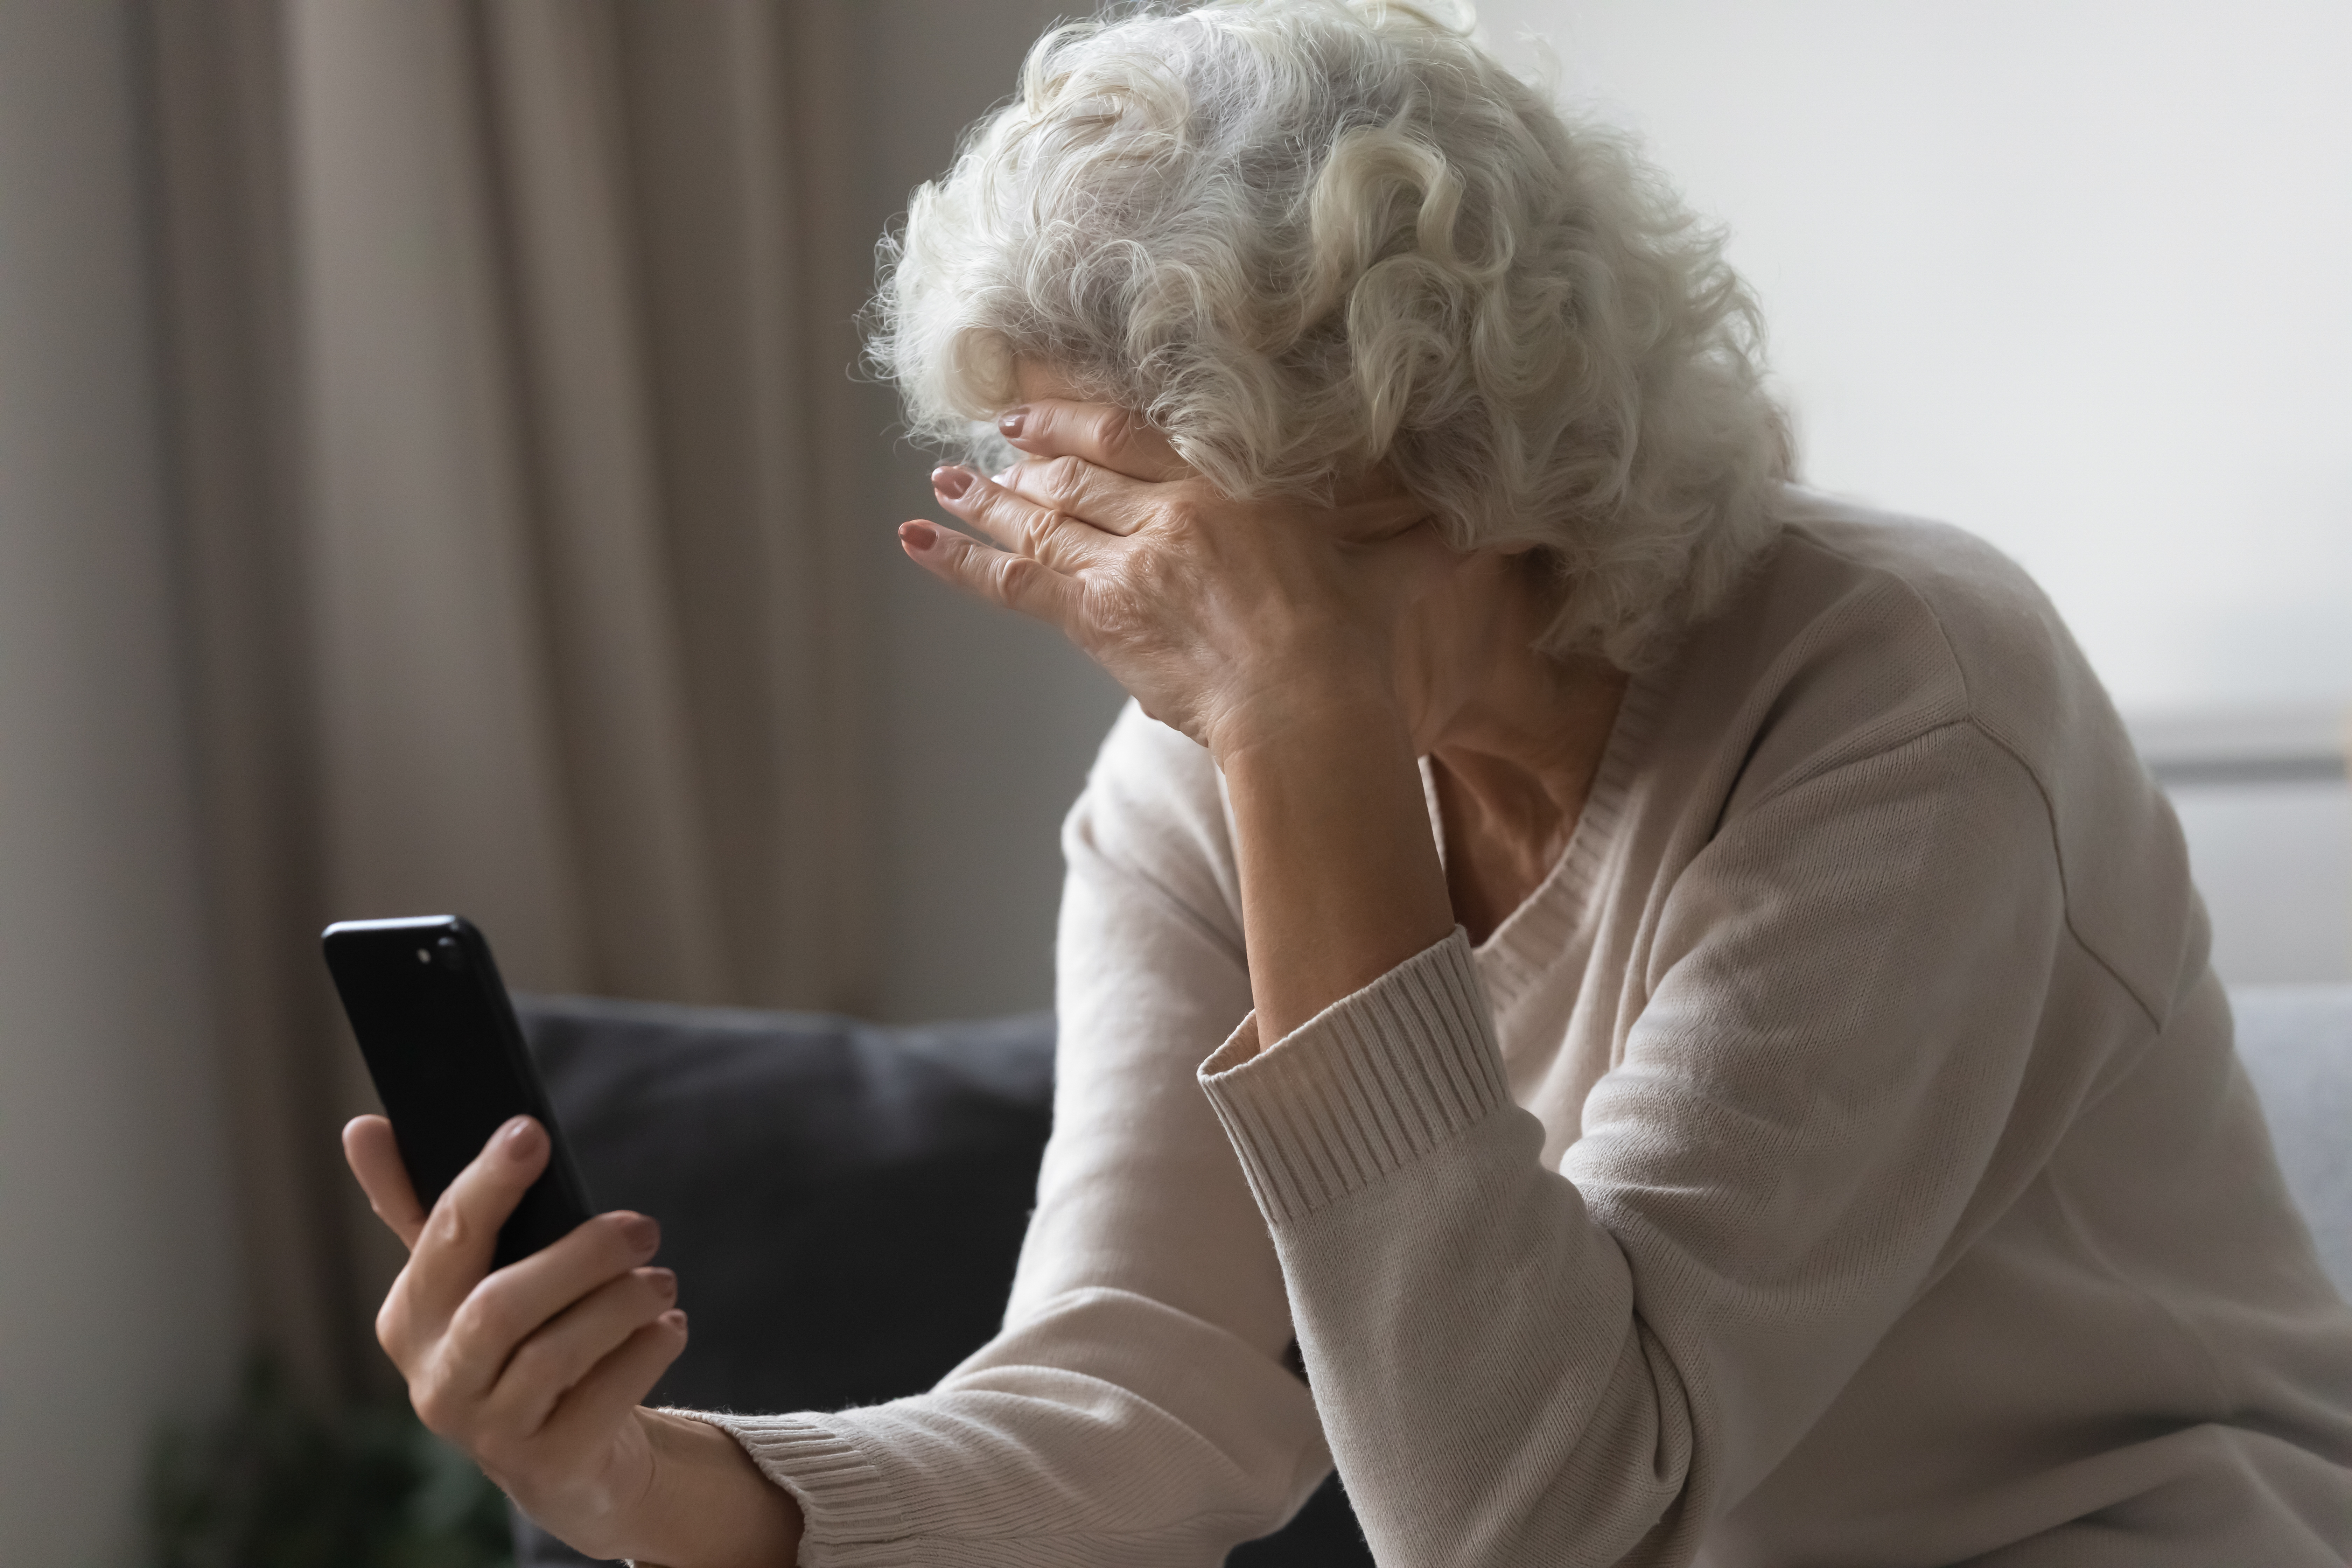 An upset older lady using a mobile phone | Source: Shutterstock